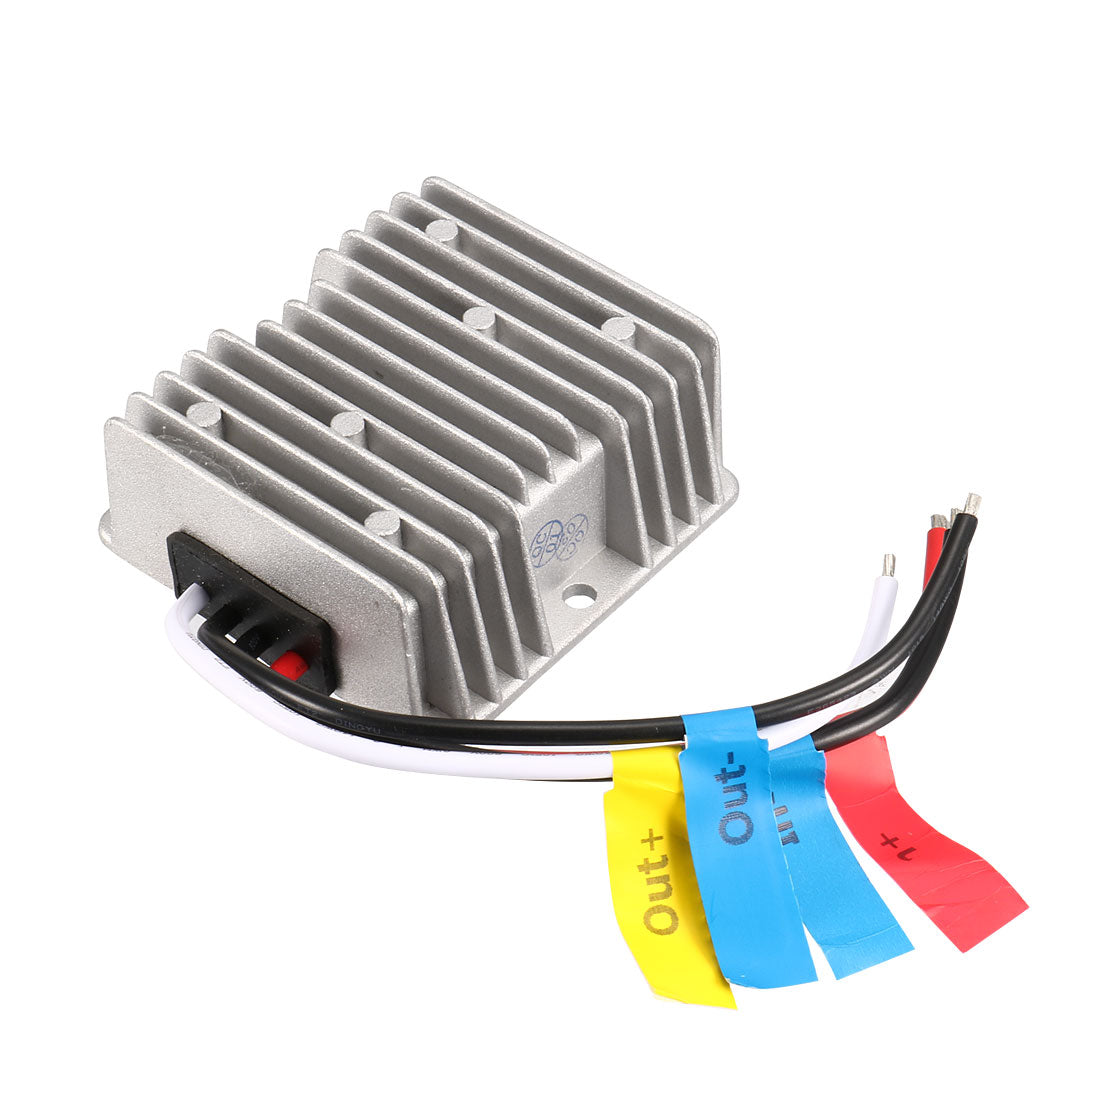 uxcell Uxcell Voltage Boost Converter Regulator DC 12V Step-up to DC 24V 12A 288W Waterproof Power Transformer